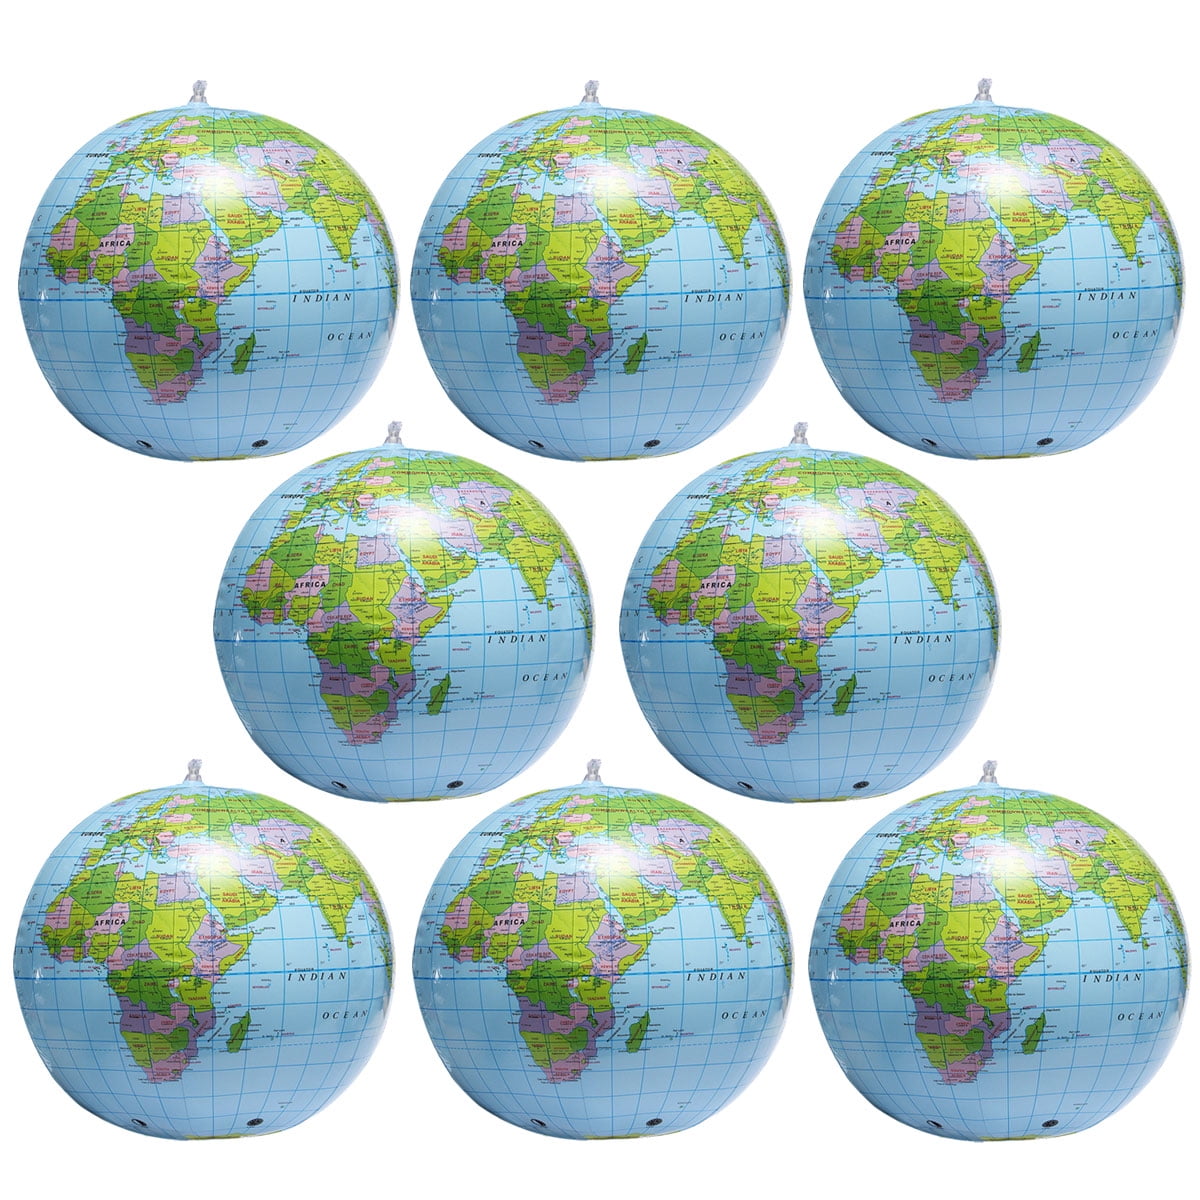 38CM PVC Inflatable Blow Up World Globe Earth Atlas Ball Map Geography Toy Tutor 